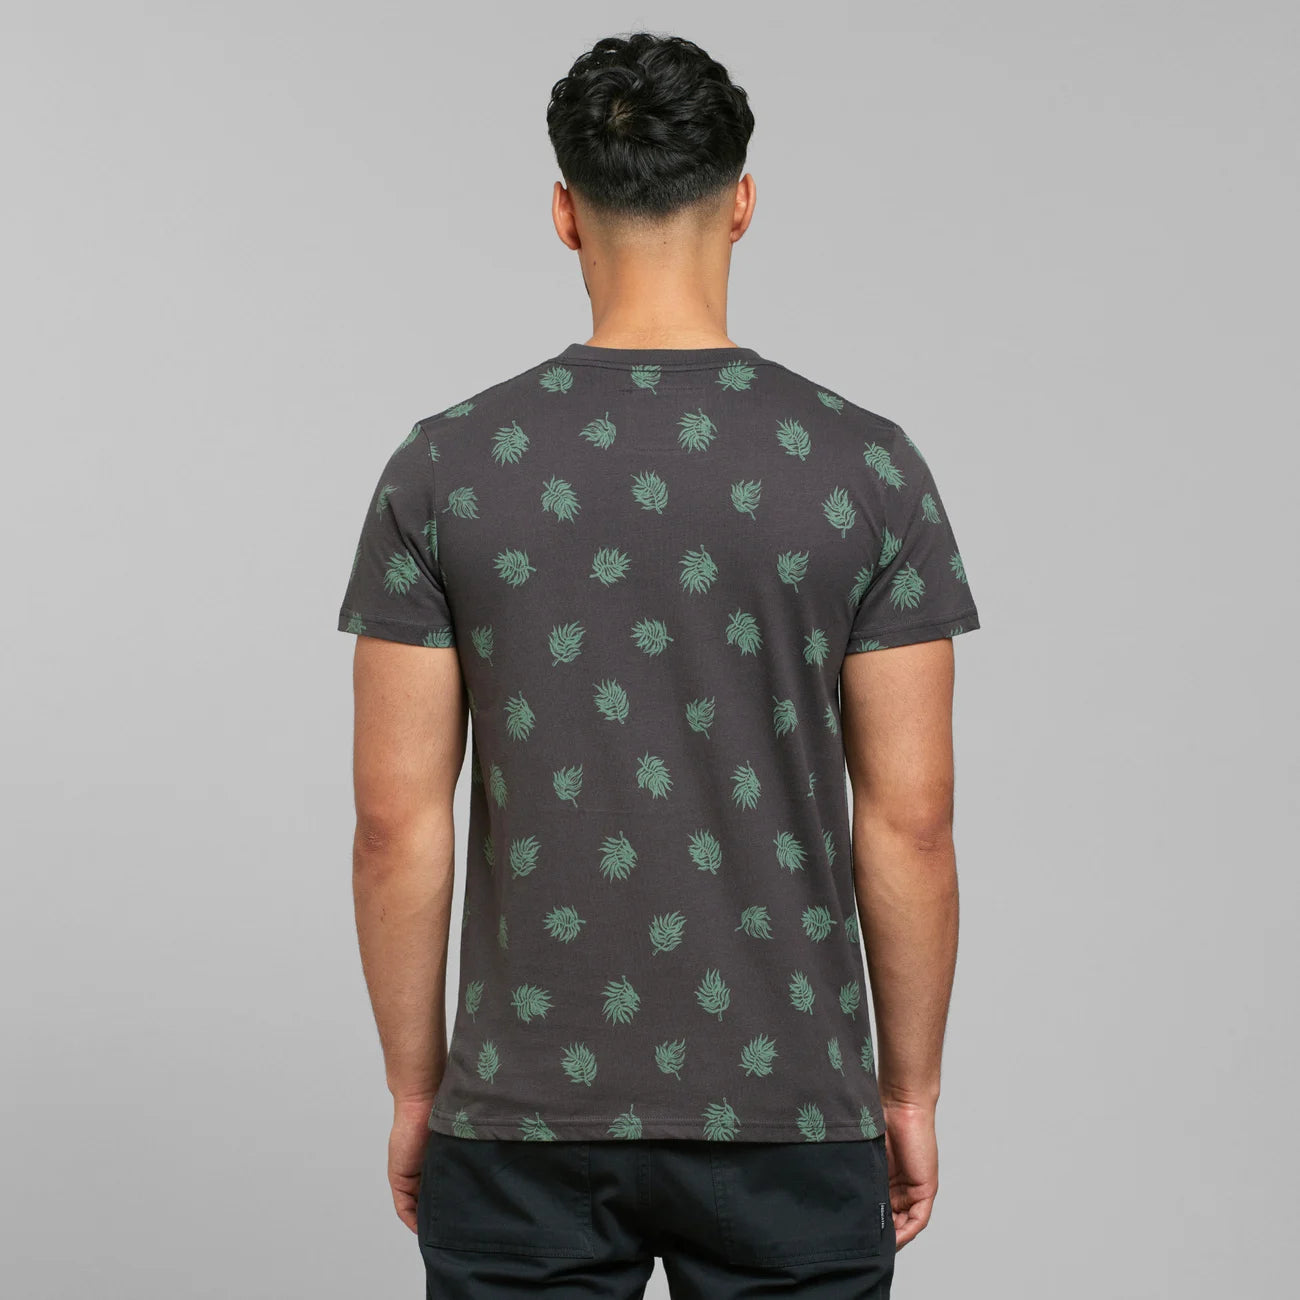 T-Shirt Stockholm Aop - Charcoal / Forged Iron